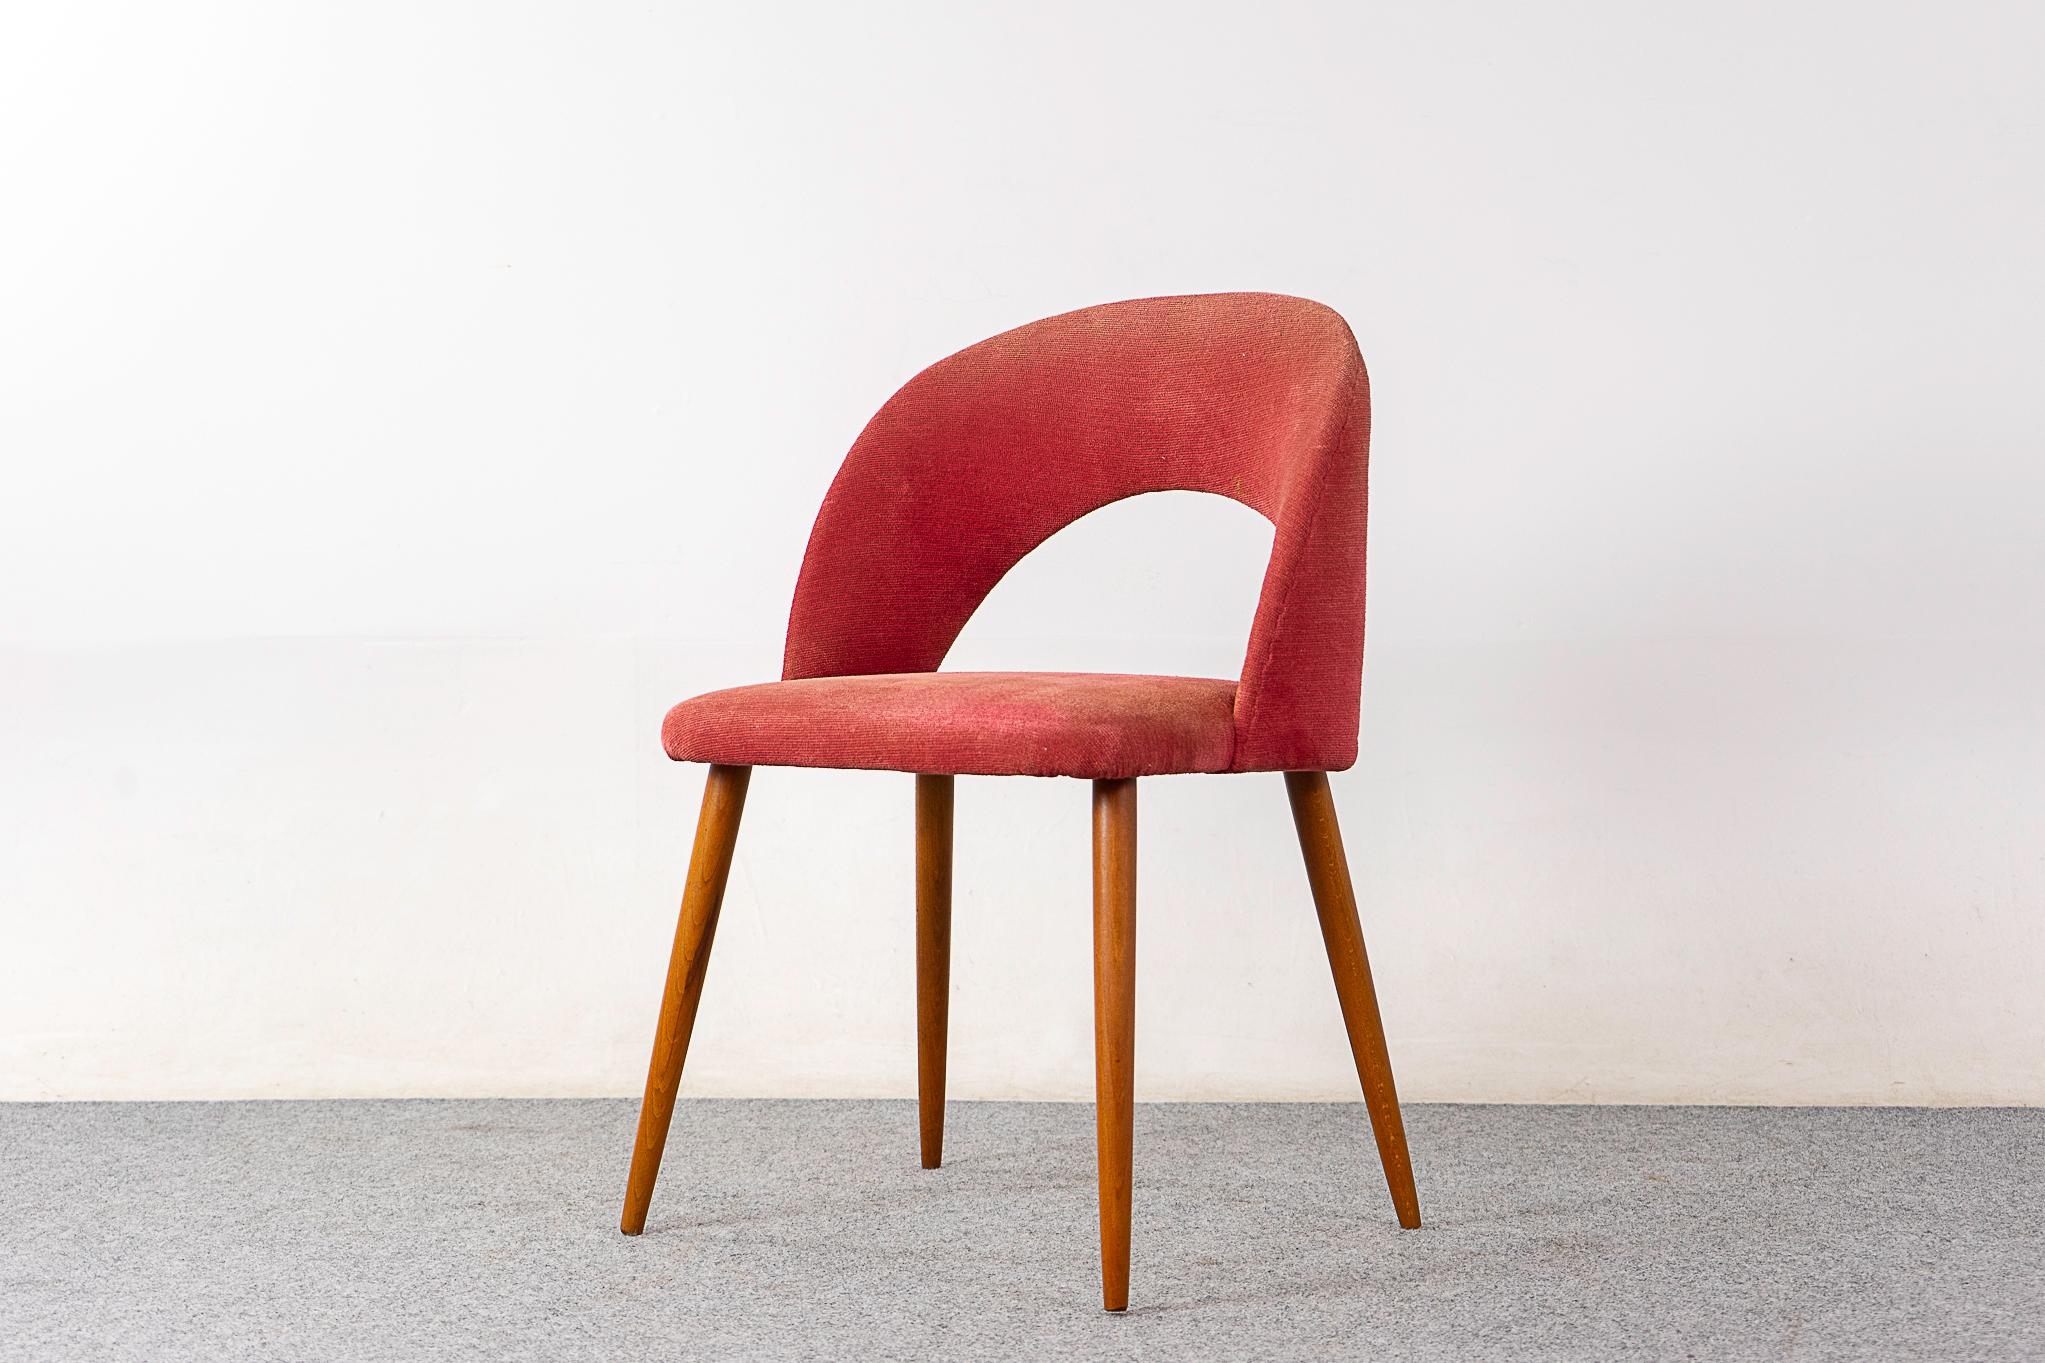 Beech mid-century side chair, circa 1950's. Beautifully arched backrest, generous seat and sleek tapered legs. Original upholstery with minor wear. 

Unrestored item being sold AS-IS.